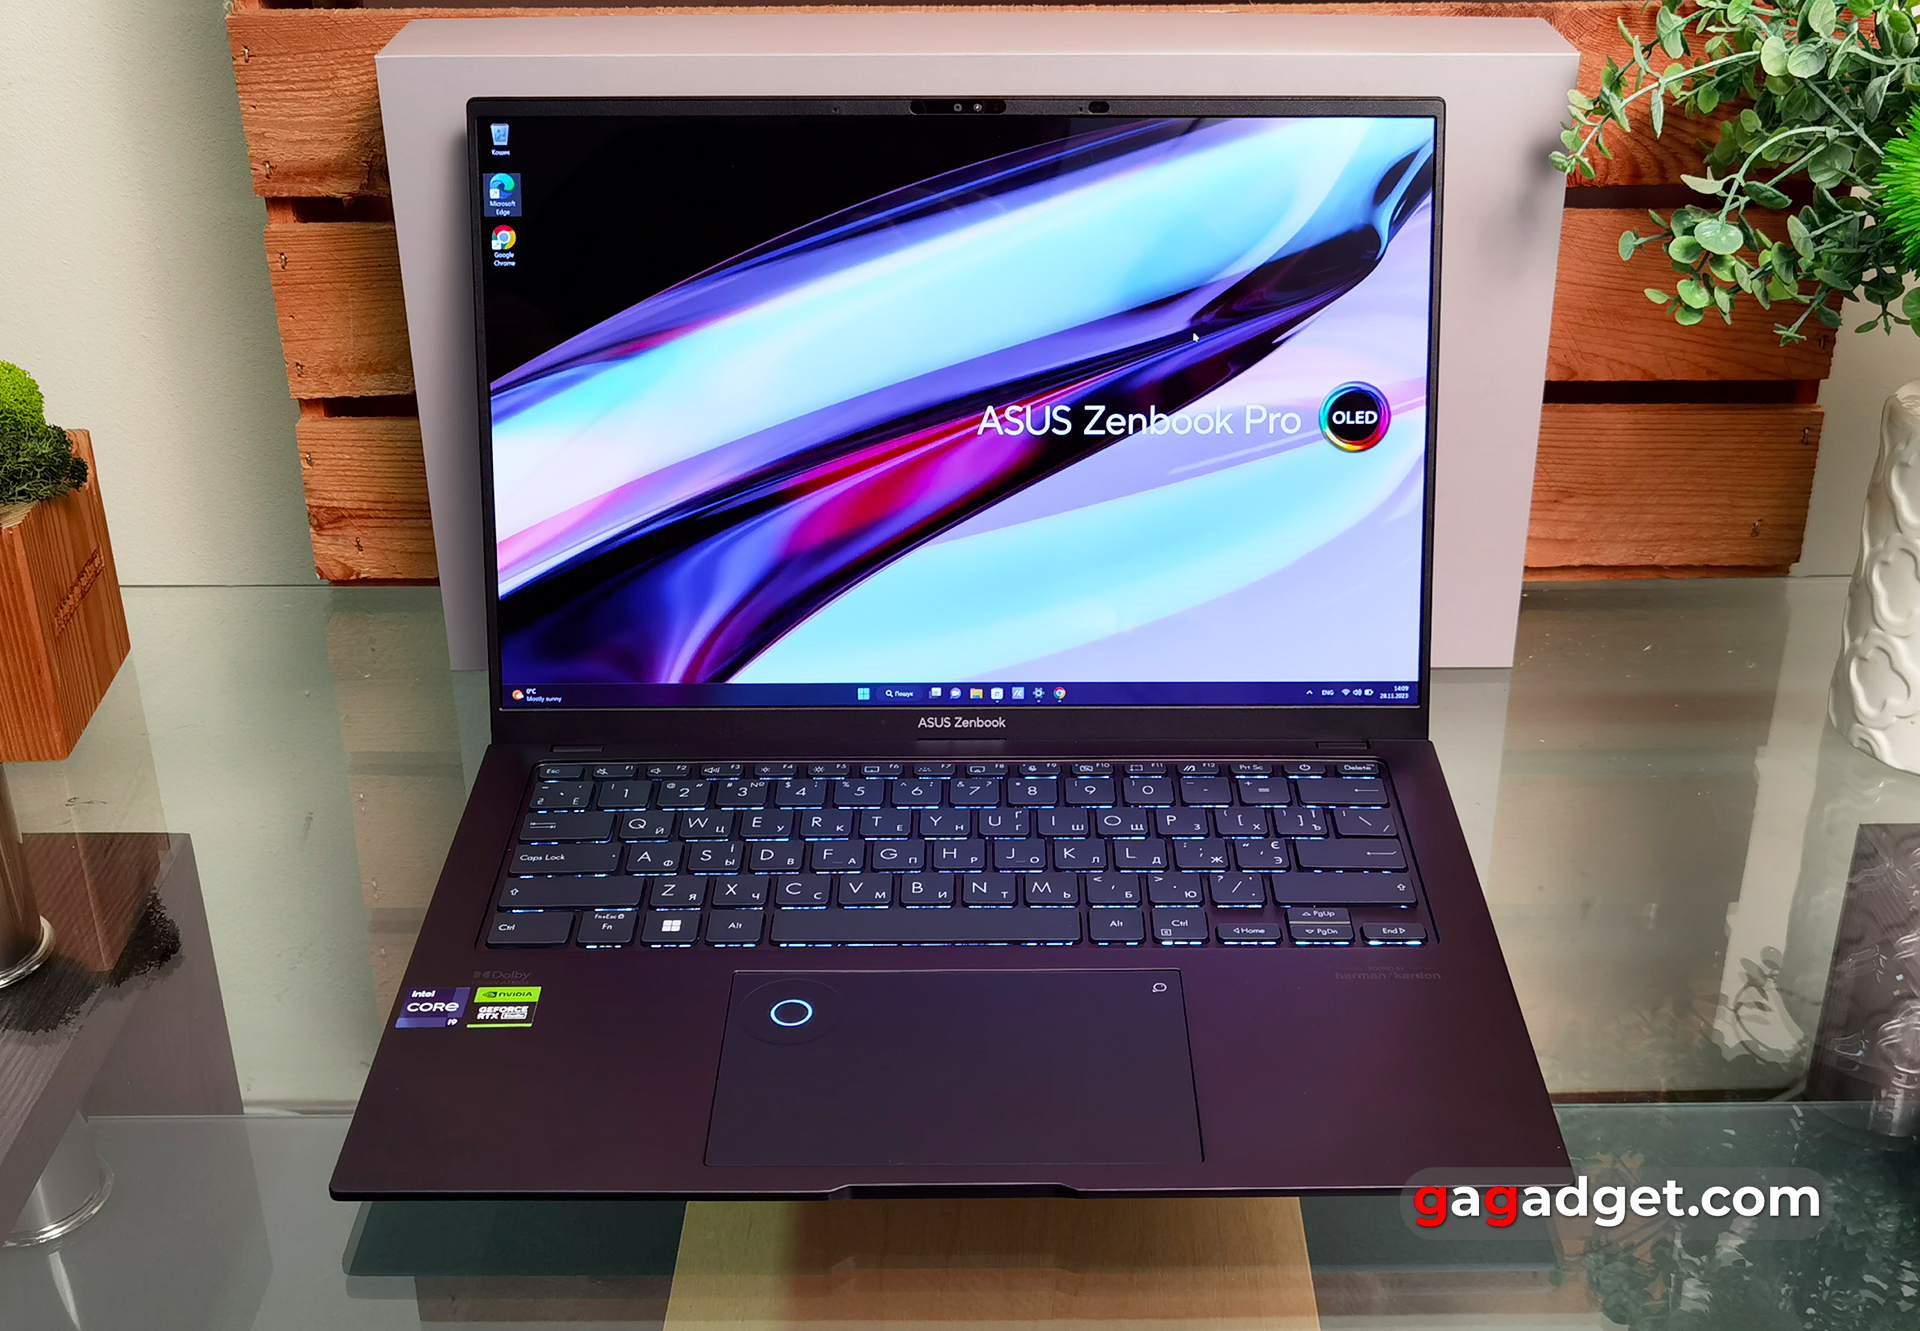 Design of the ASUS Zenbook Pro 14 OLED